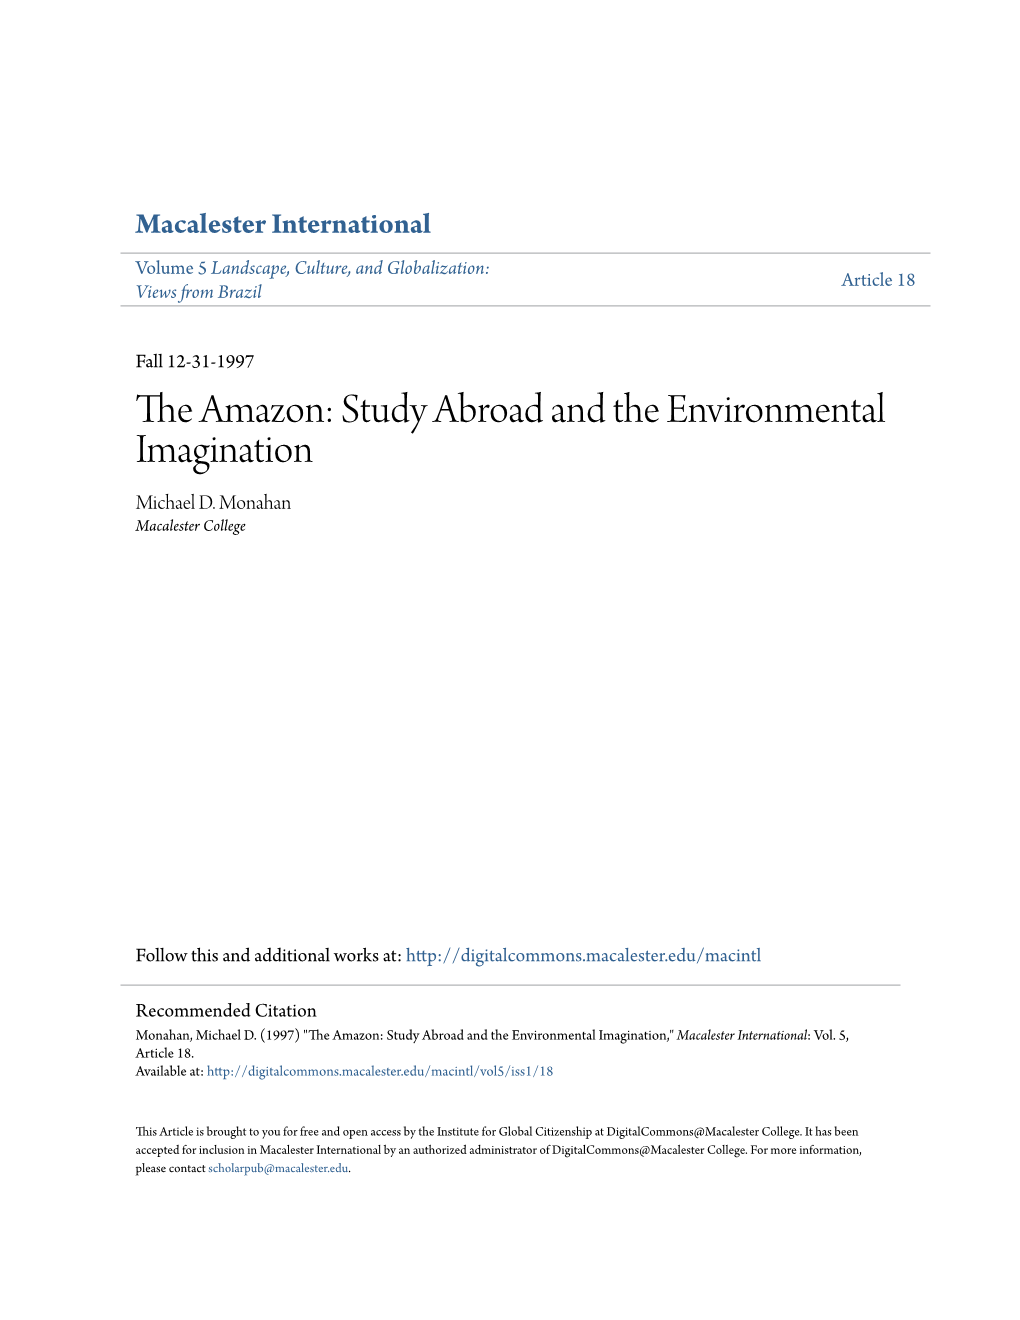 Study Abroad and the Environmental Imagination Michael D